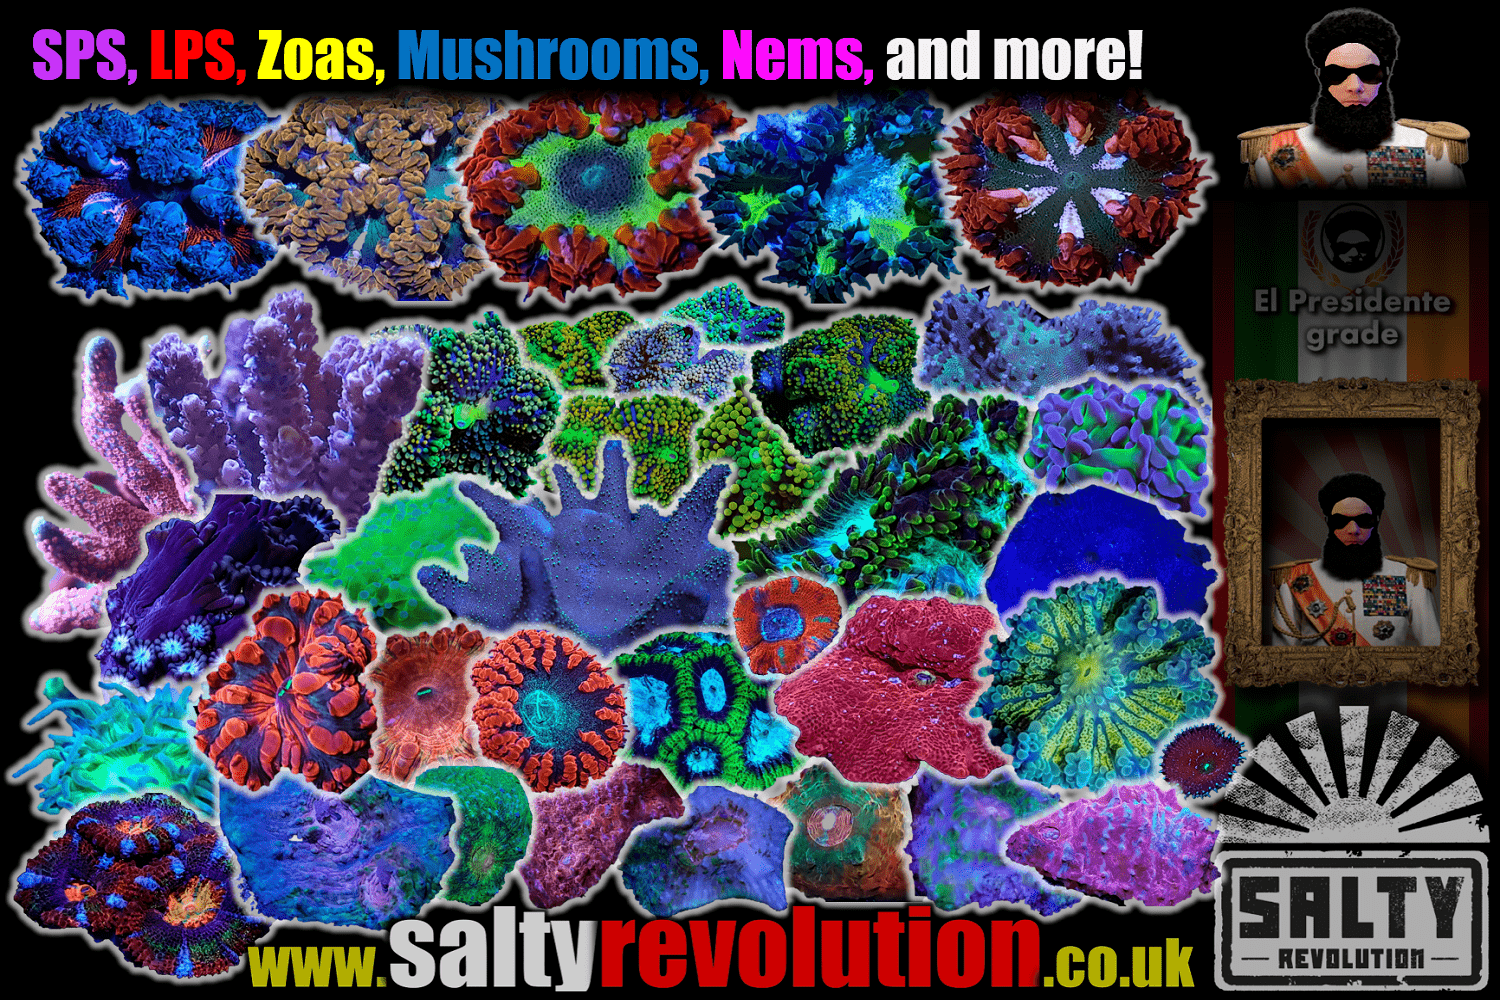 2202 04 09 SPS, LPS, Zoas, Mushrooms, Nems and more..png